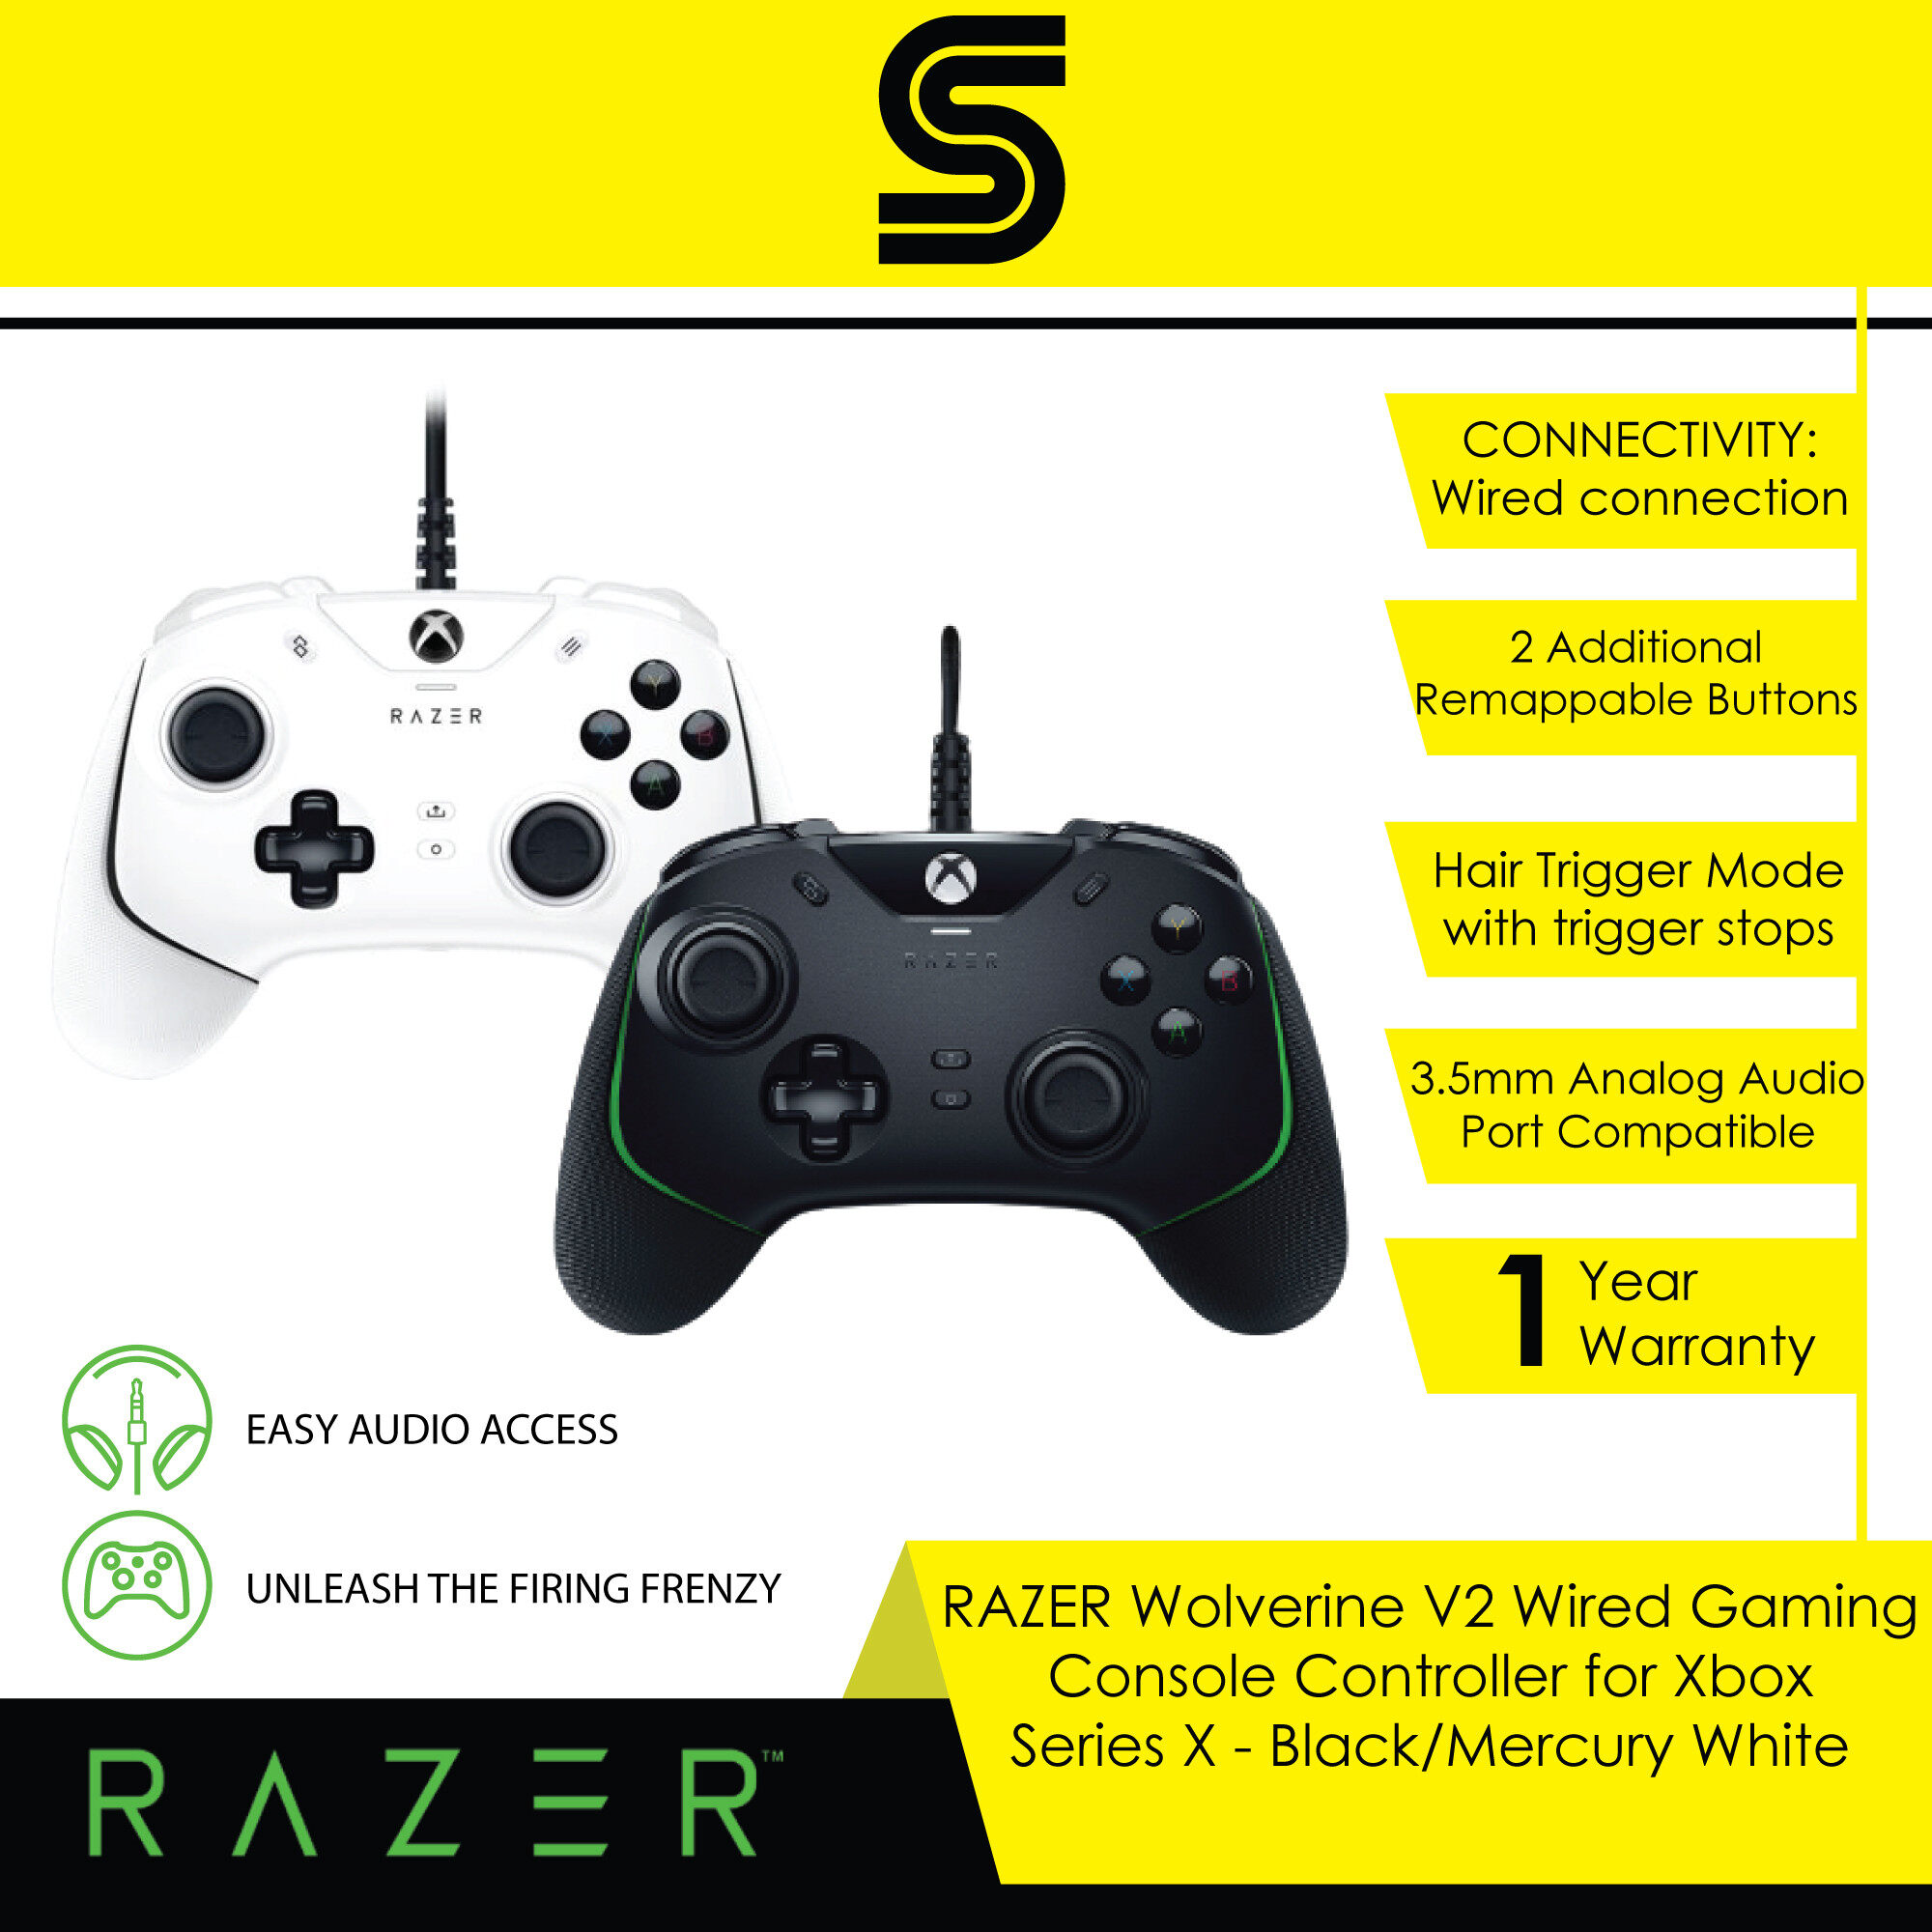 RAZER Wolverine V2 Wired Gaming Console Controller for Xbox Series X - RZ06-03560100-R3M1